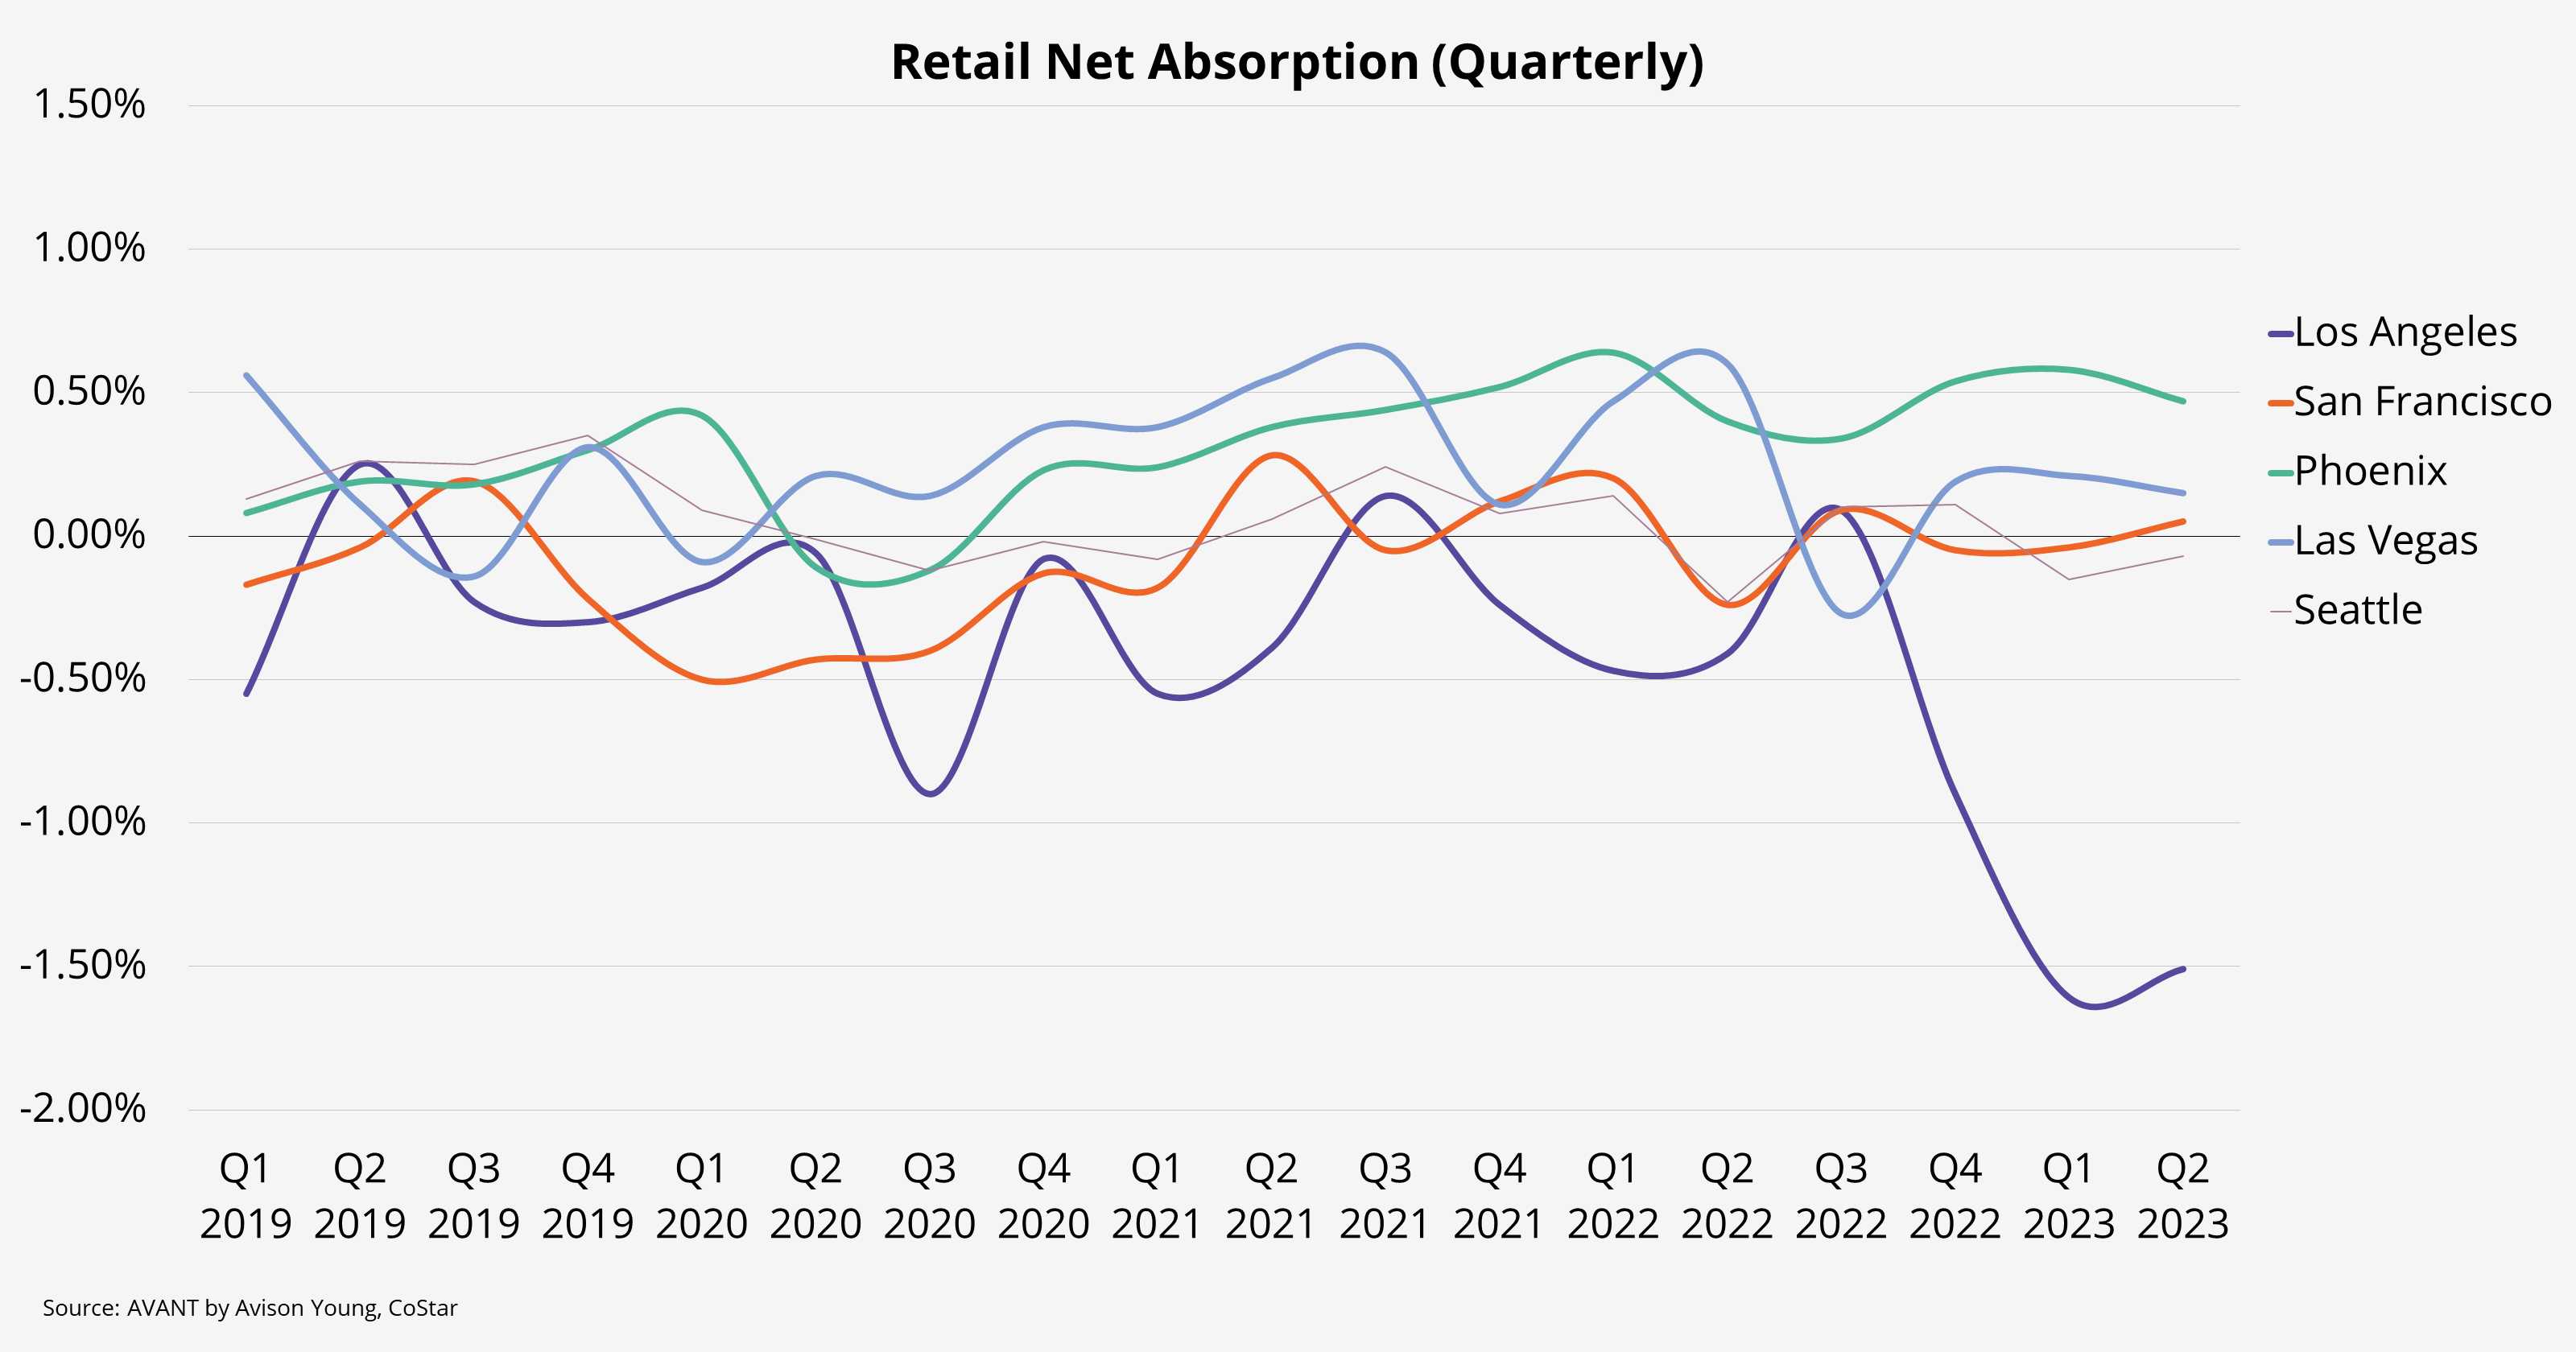 Southern California Retail continues to slump; underperforming its major market peers